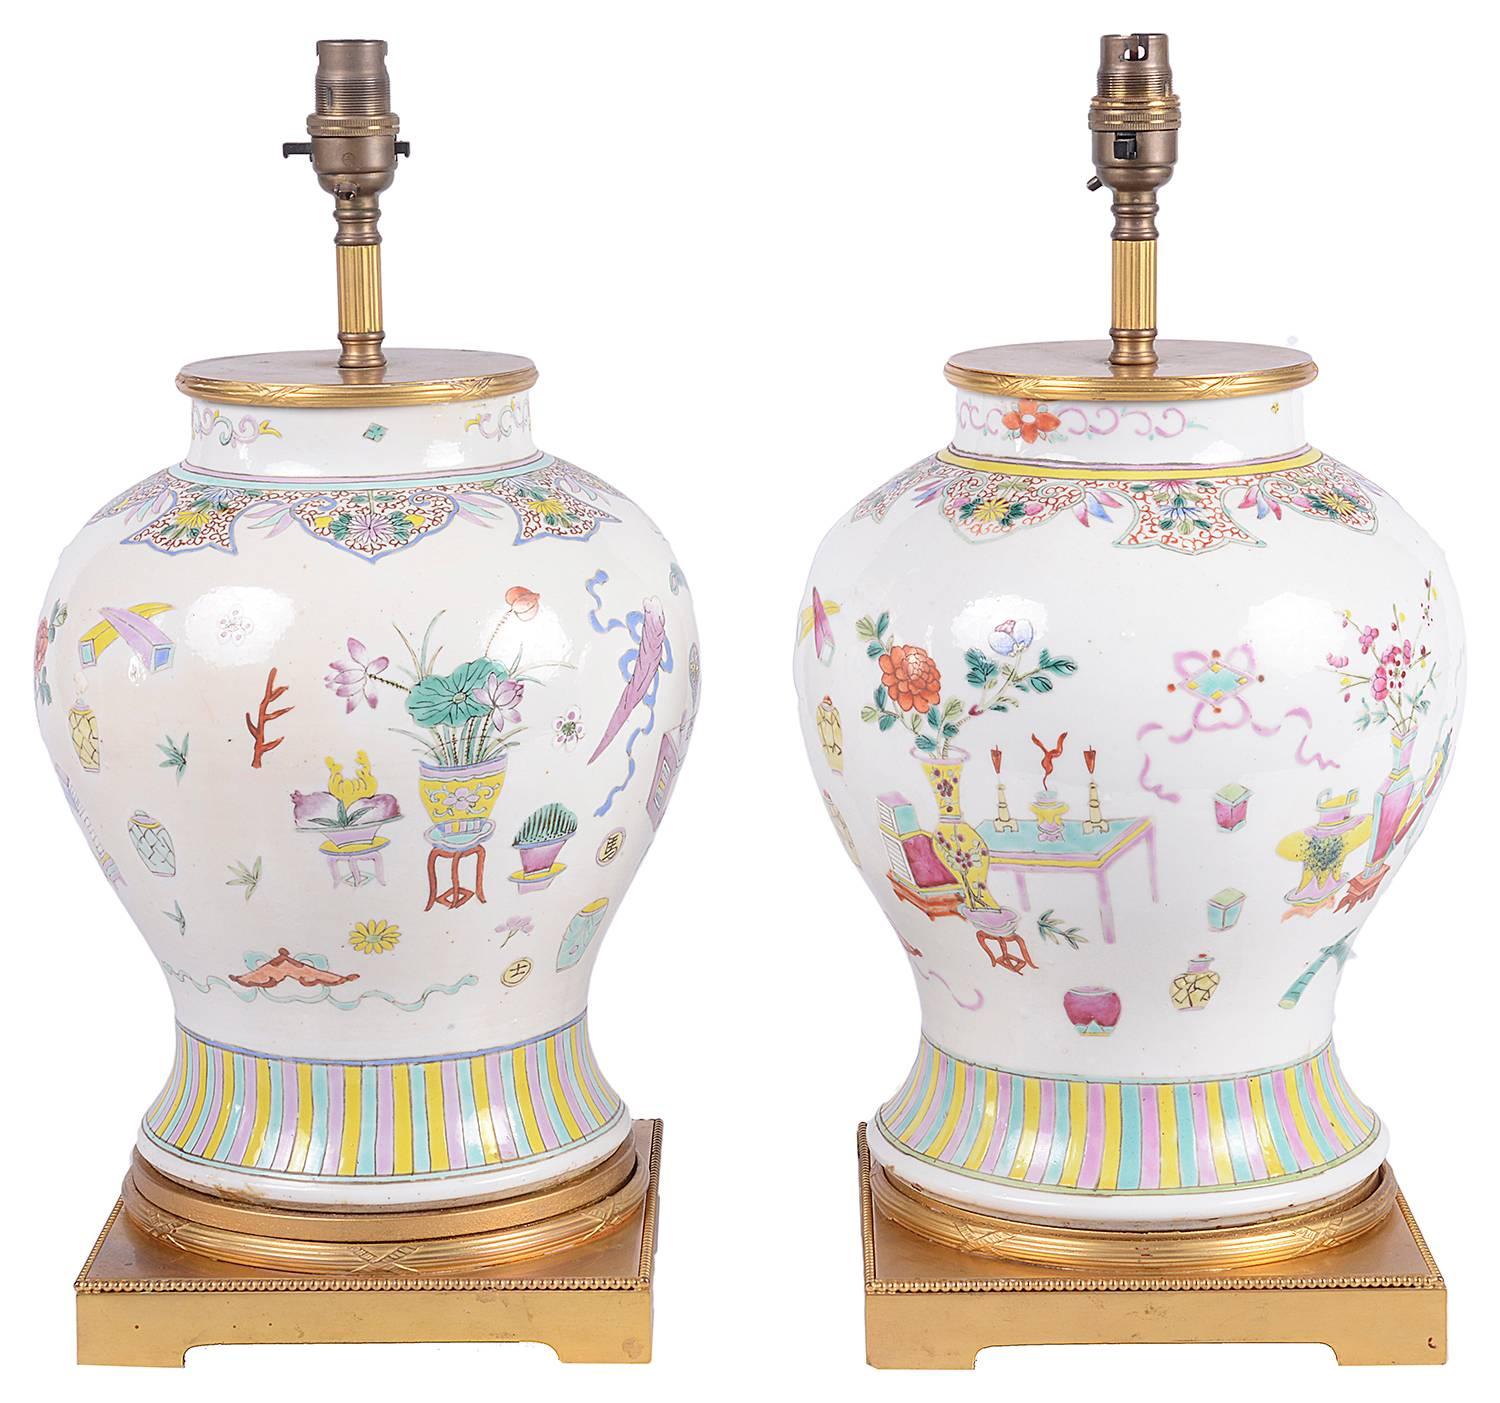 A very decorative pair of late 19th century Chinese Famille rose vases / lamps. Each having various vases, flowers and motif decoration, mounted in gilded ormolu tops and molded bases.